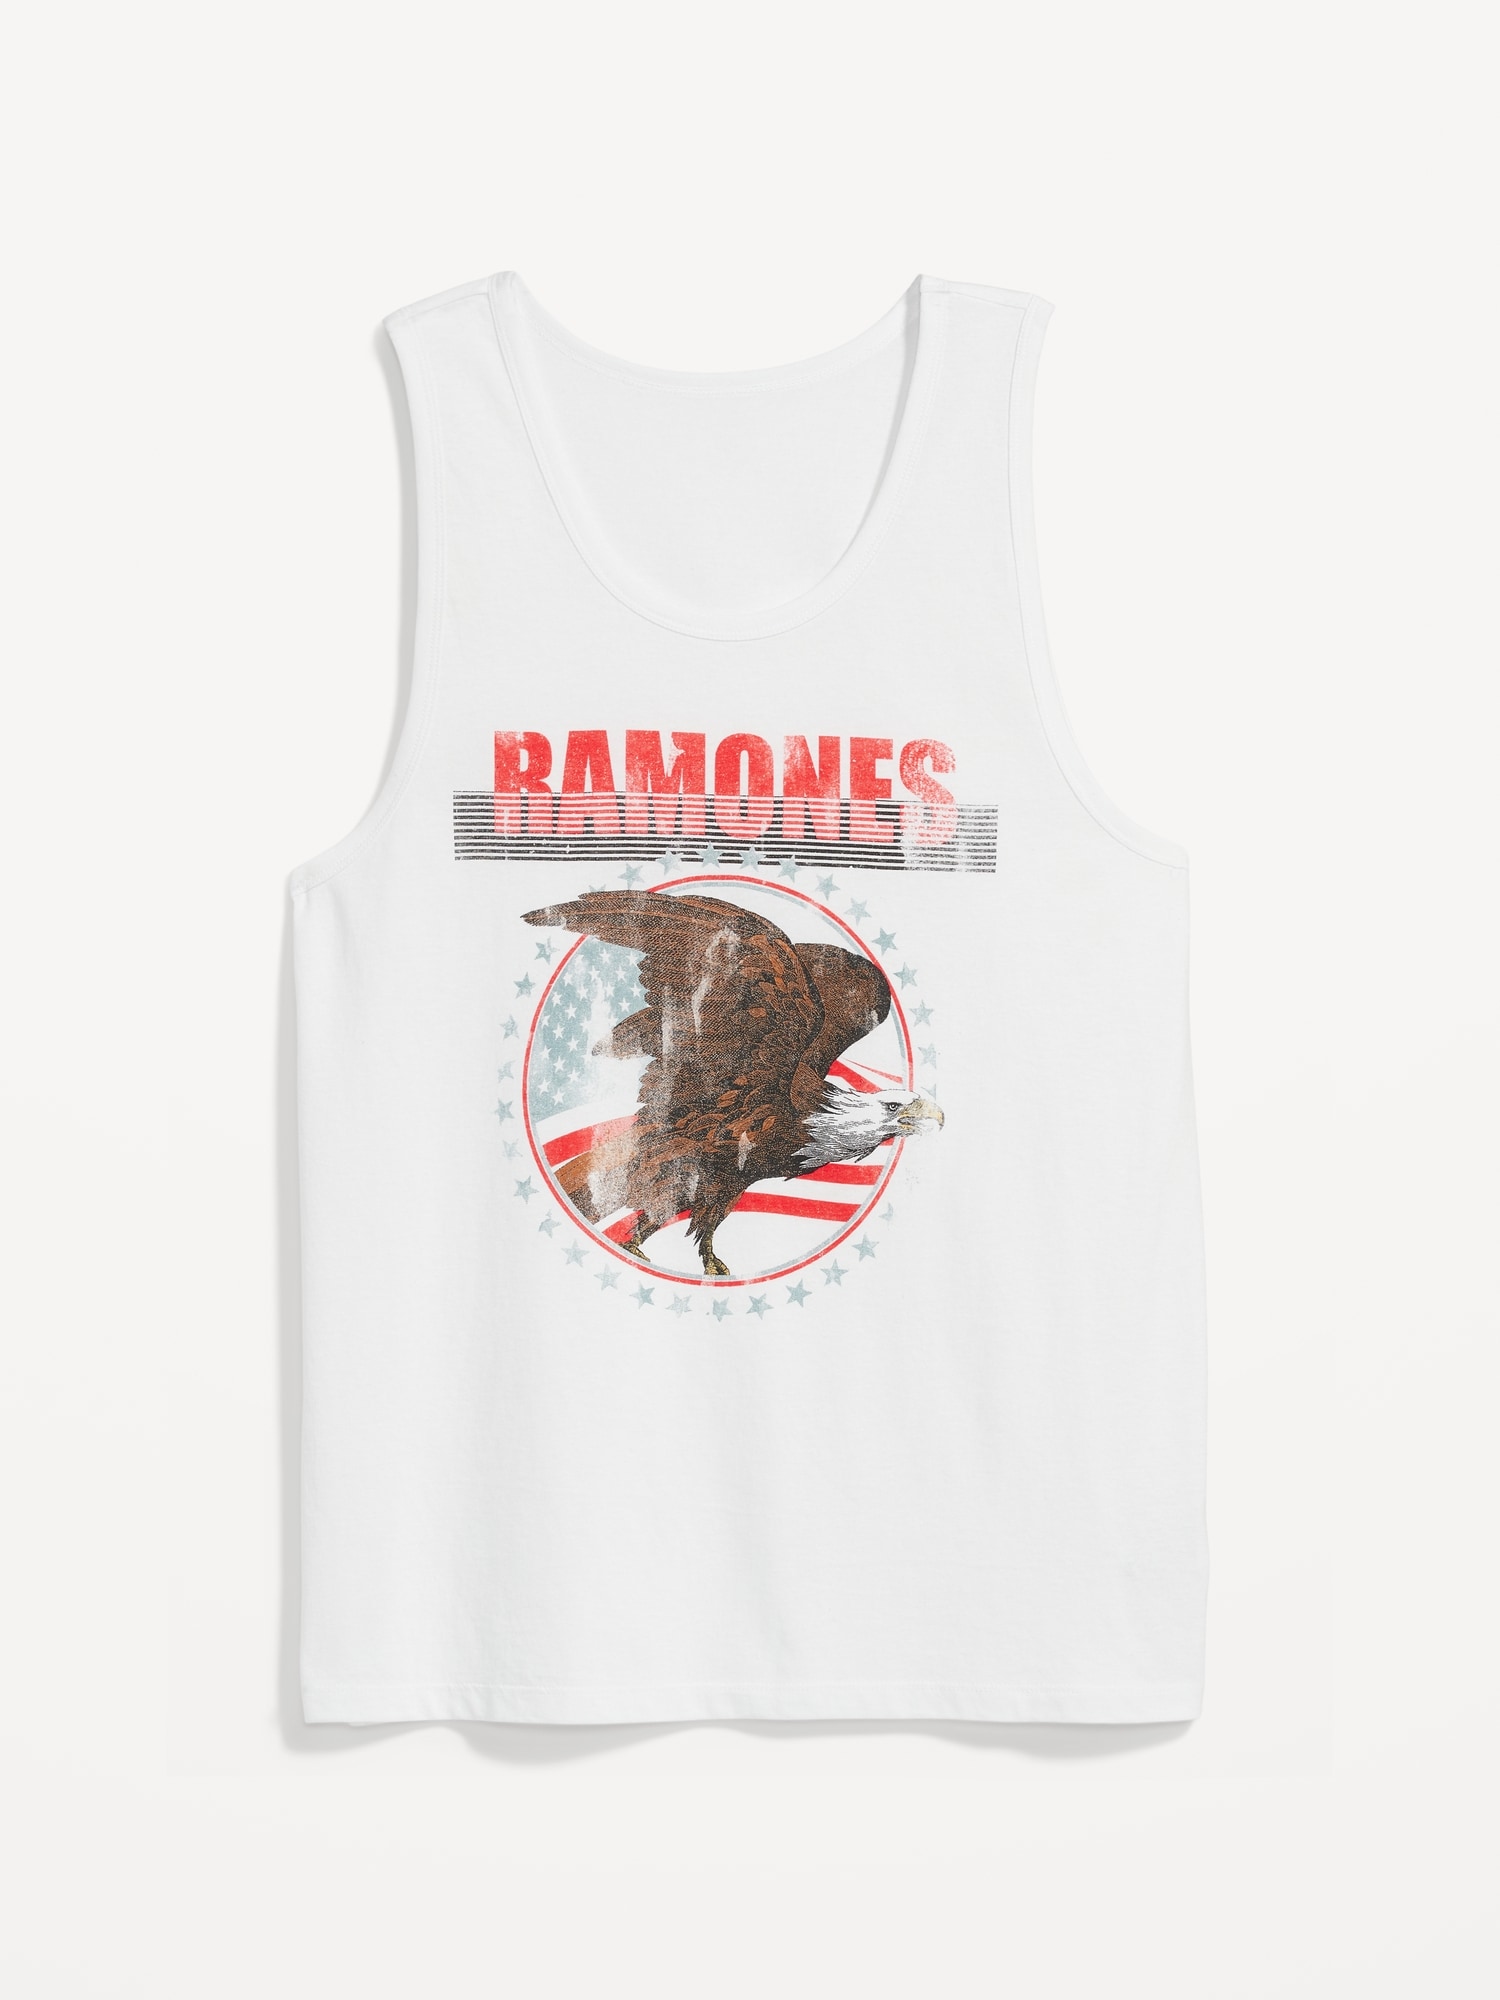 Old Navy The Ramones® Gender-Neutral Graphic Tank Top for Adults white. 1